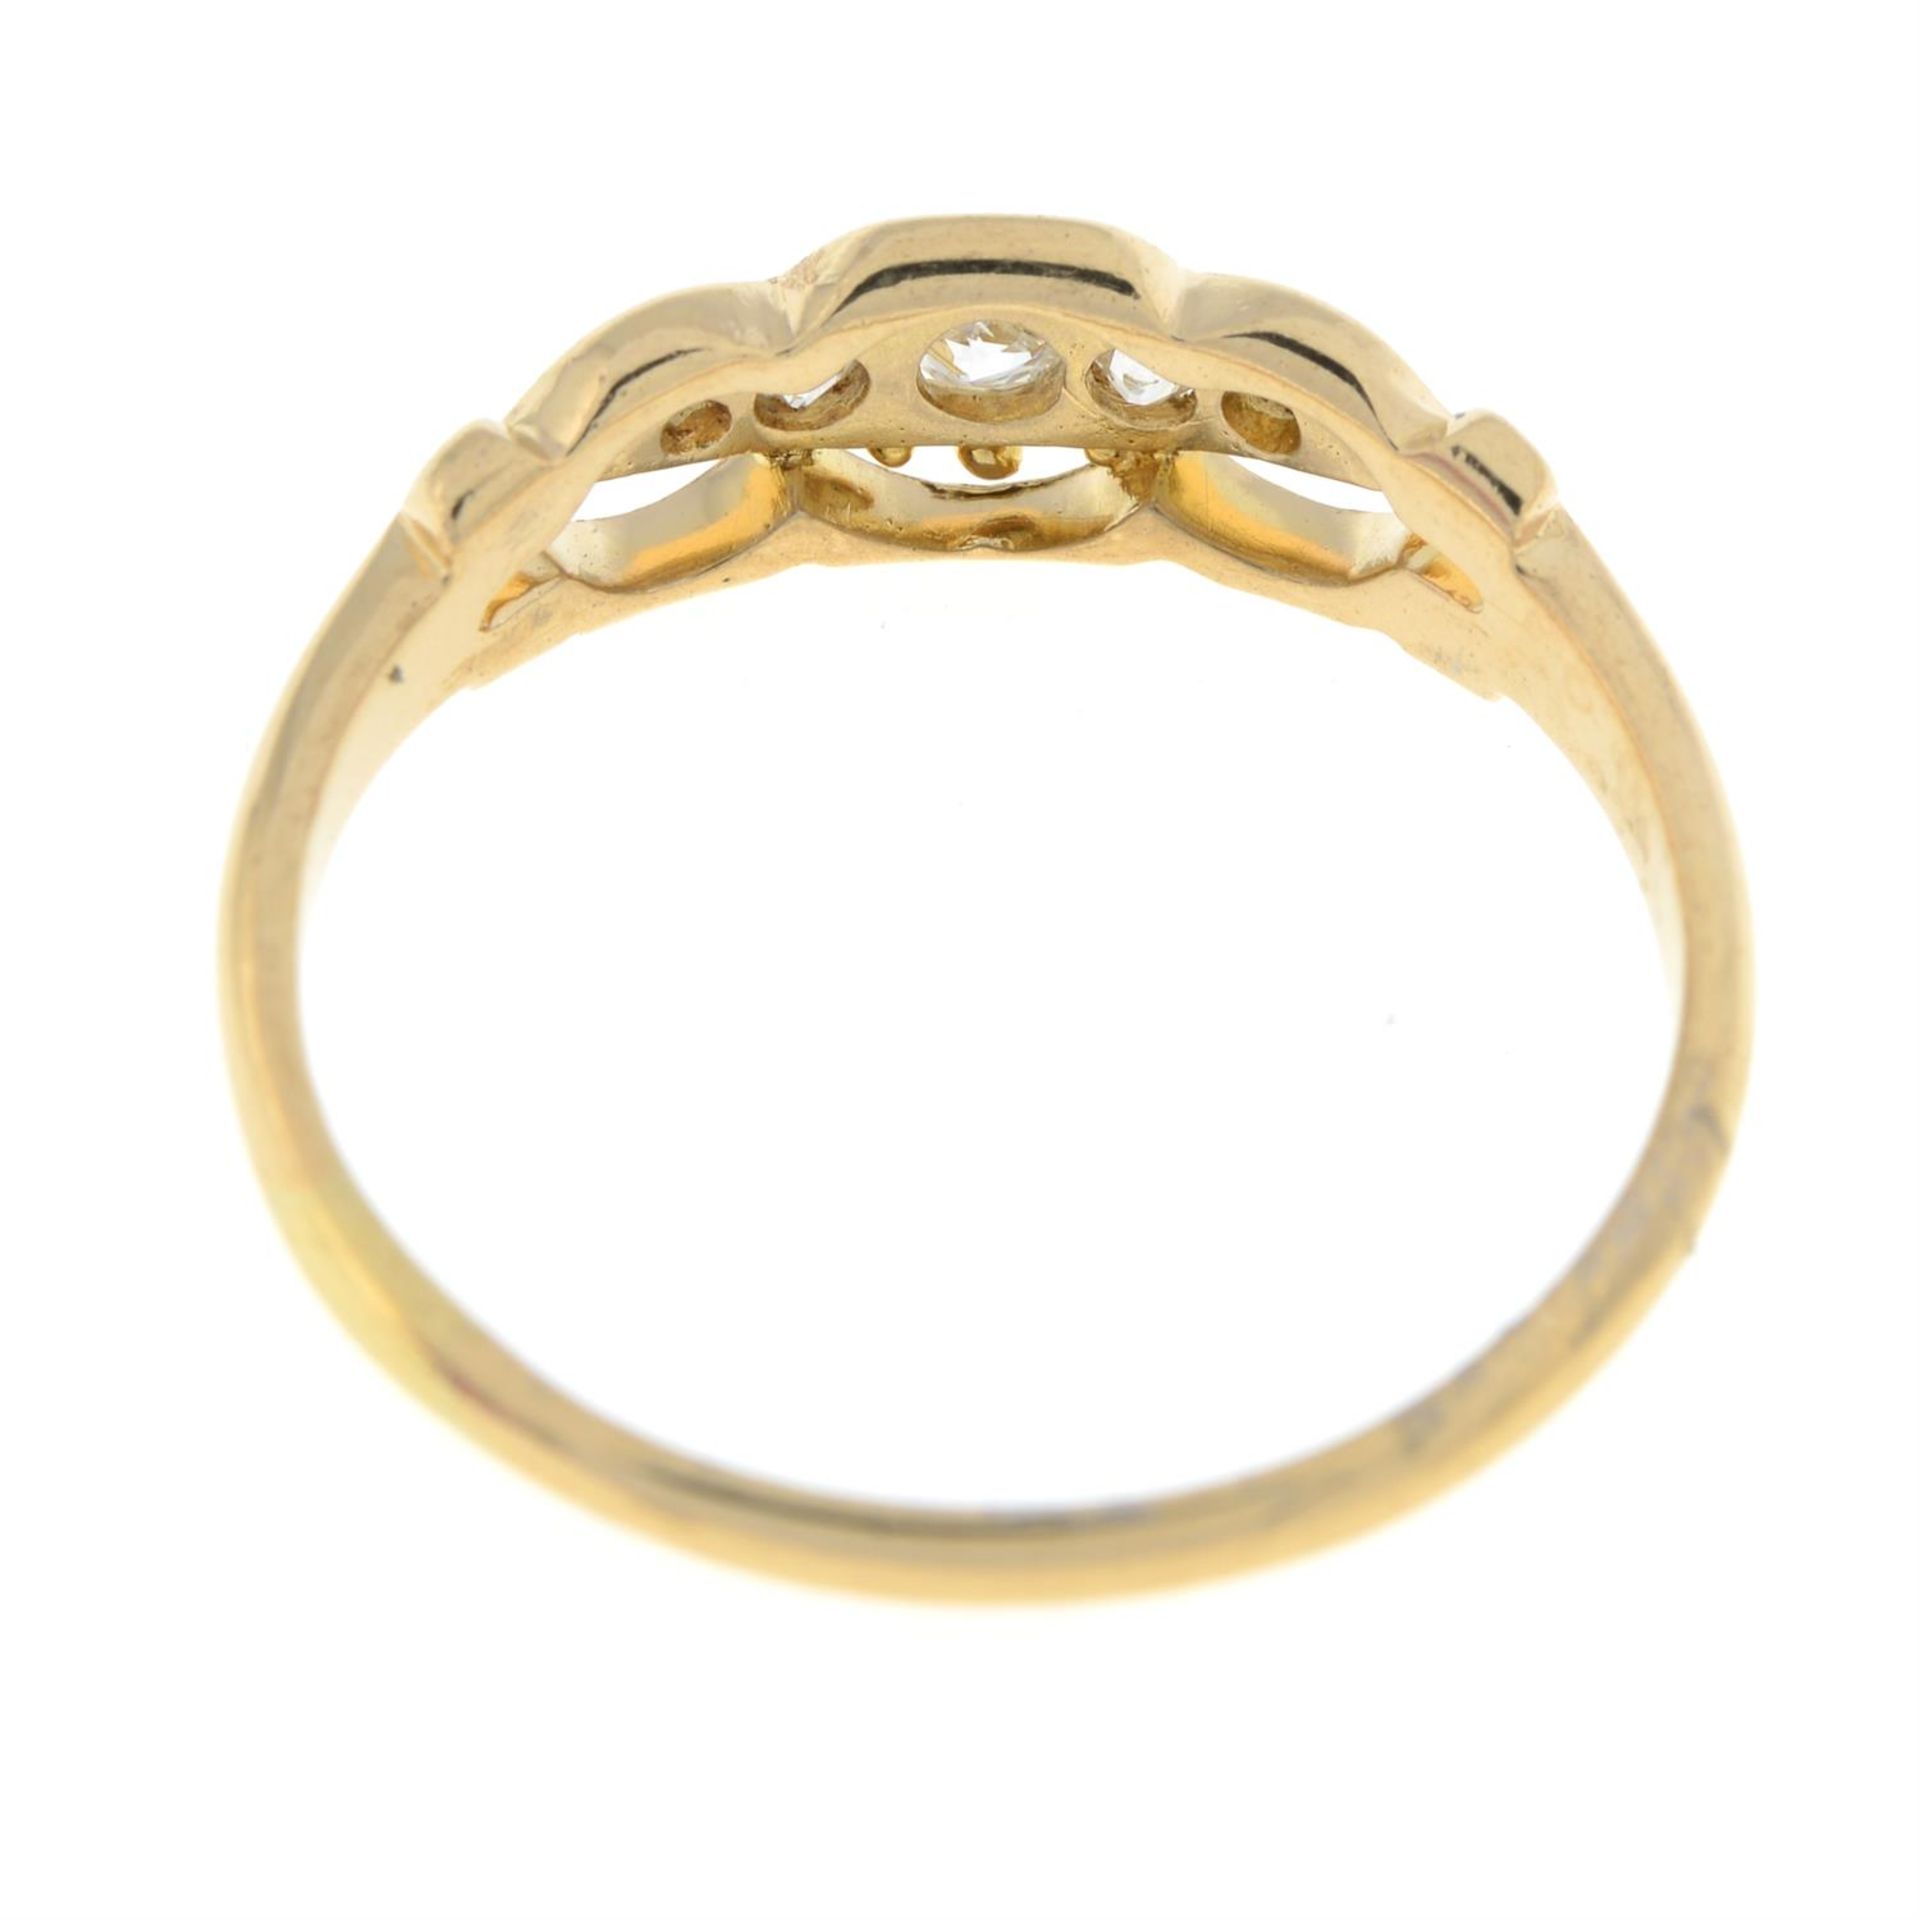 An Edwardian 18ct gold old-cut diamond five-stone ring. - Image 2 of 2